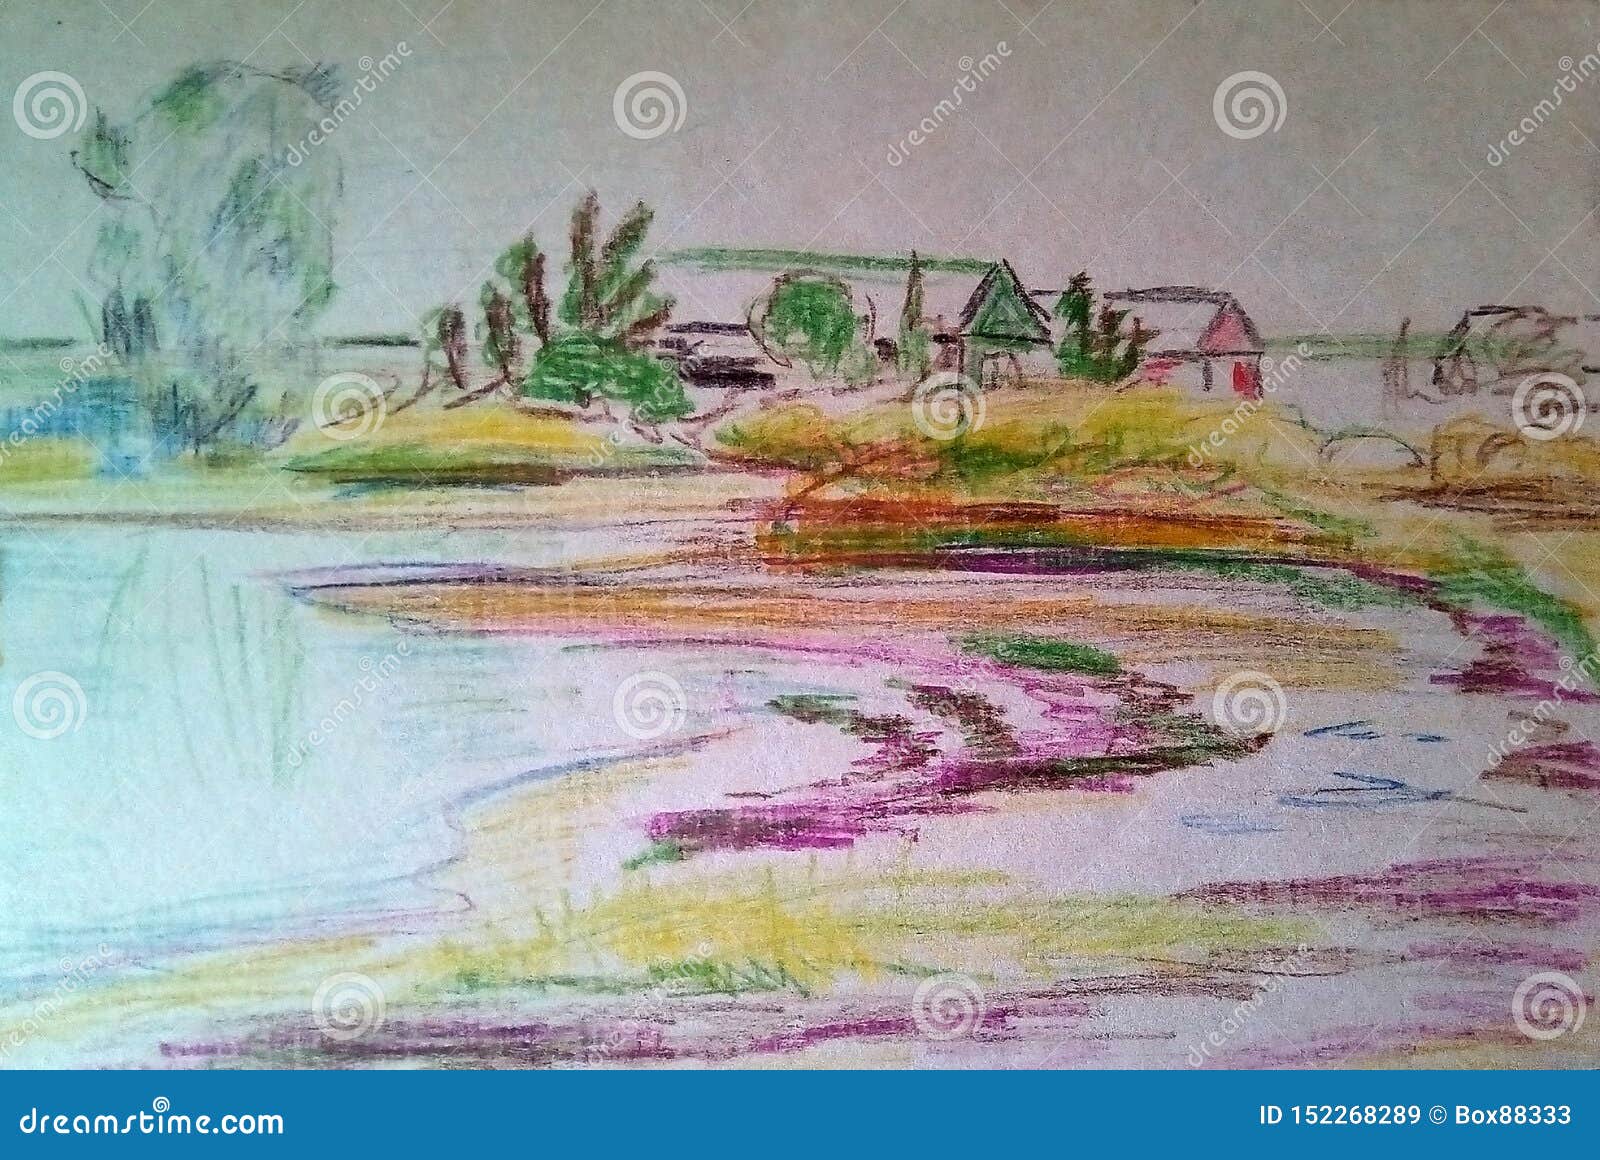 How to Coloring A Scenery Art with COLOR PENCILS | Step by Step Shading | Drawing  scenery, Colored pencils, Shading drawing